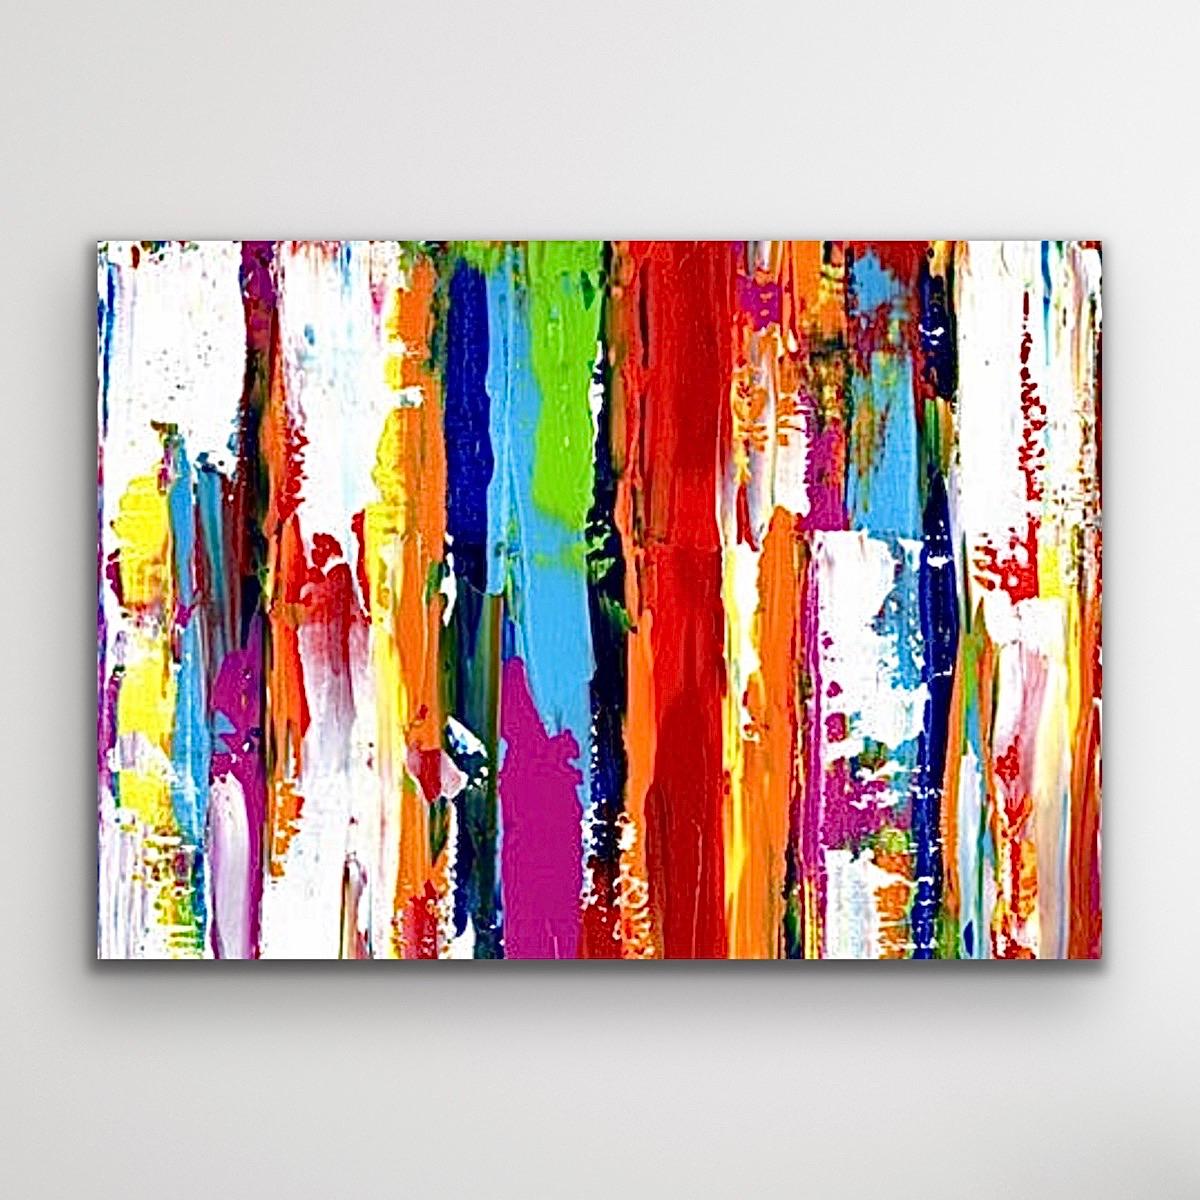 Contemporary Colorful Abstract Art, Modern Giclee Print, Signed Limited Edition 3